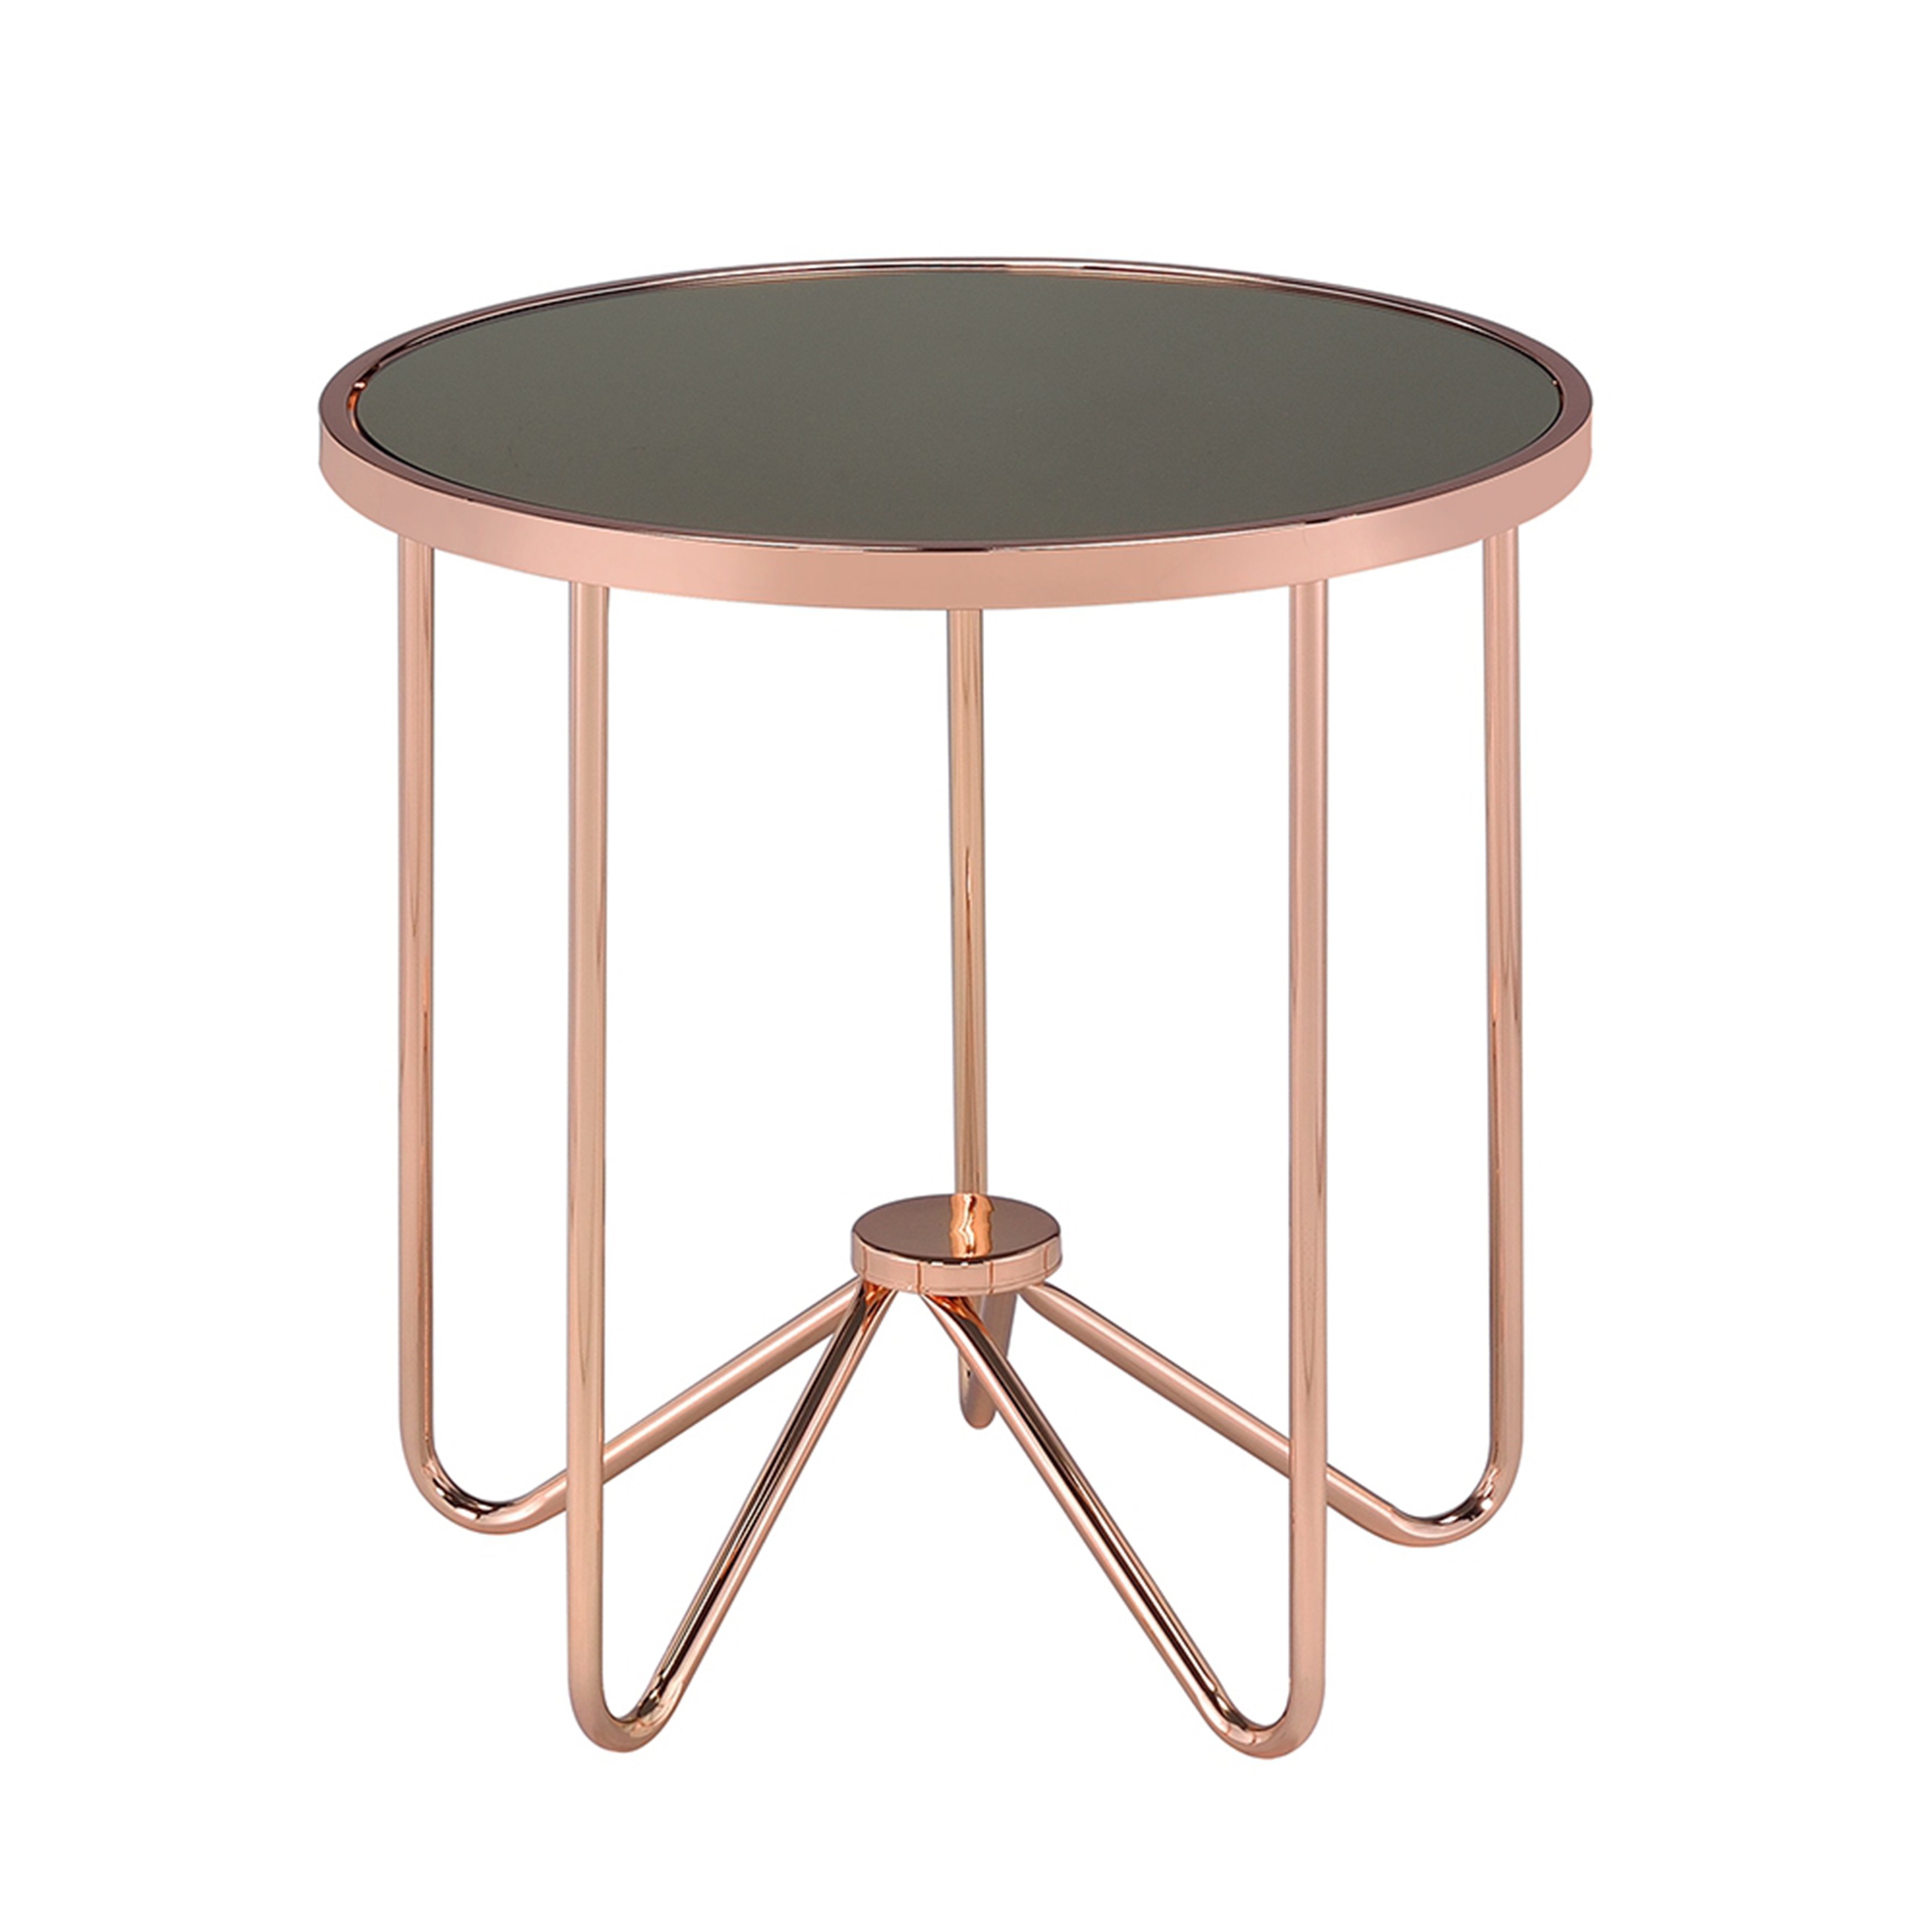 acme furniture alivia rose gold metal and glass accent tables table free shipping today vintage style side modern white coffee round end storage cabinet with doors chair set